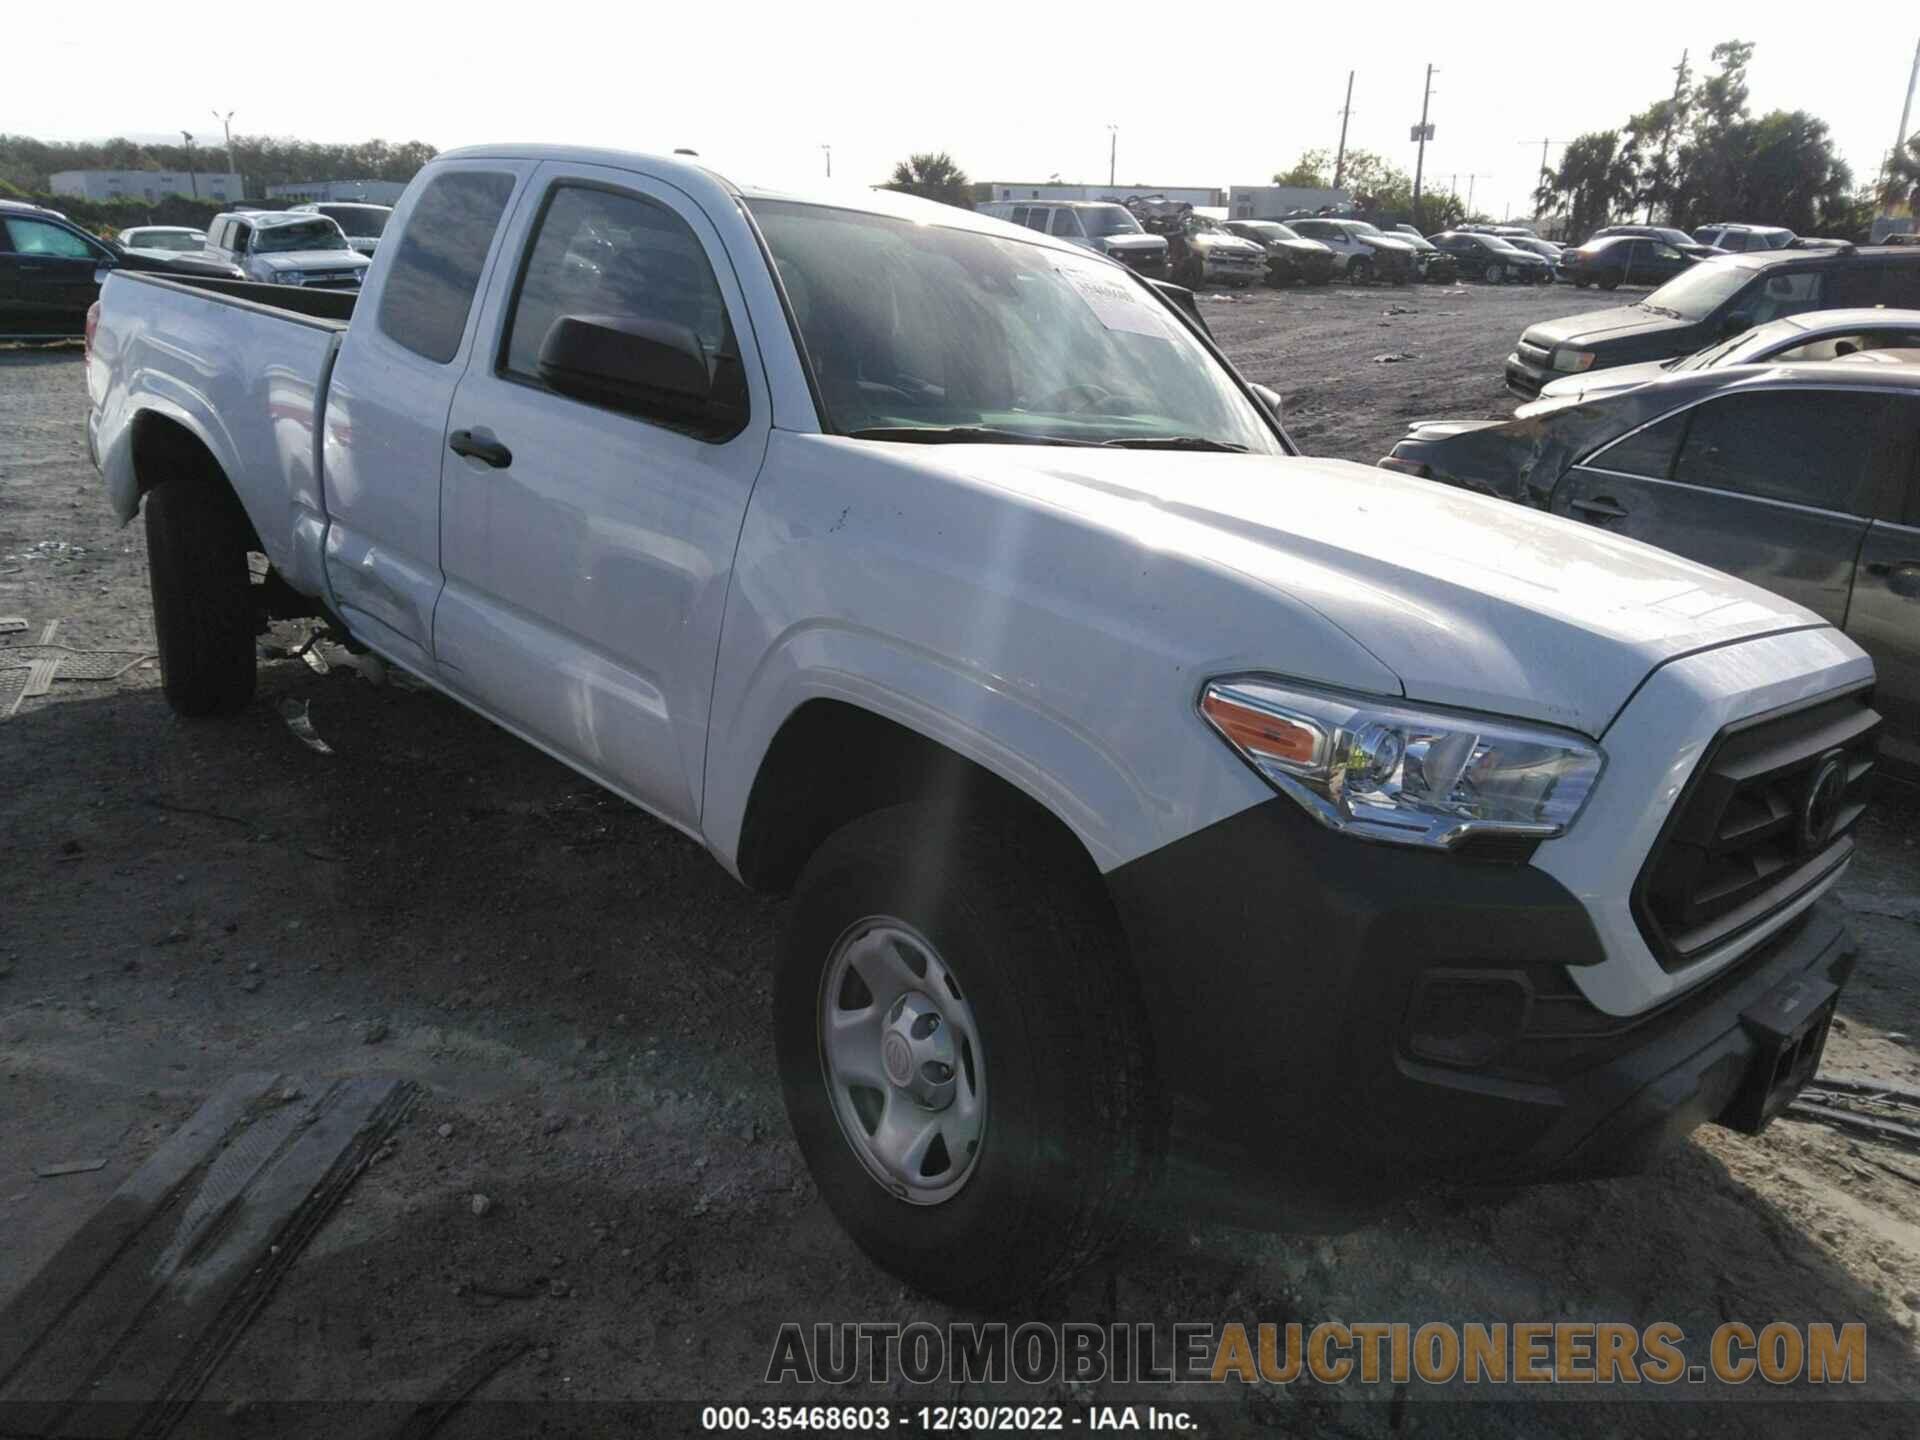 3TYRX5GN9NT044394 TOYOTA TACOMA 2WD 2022